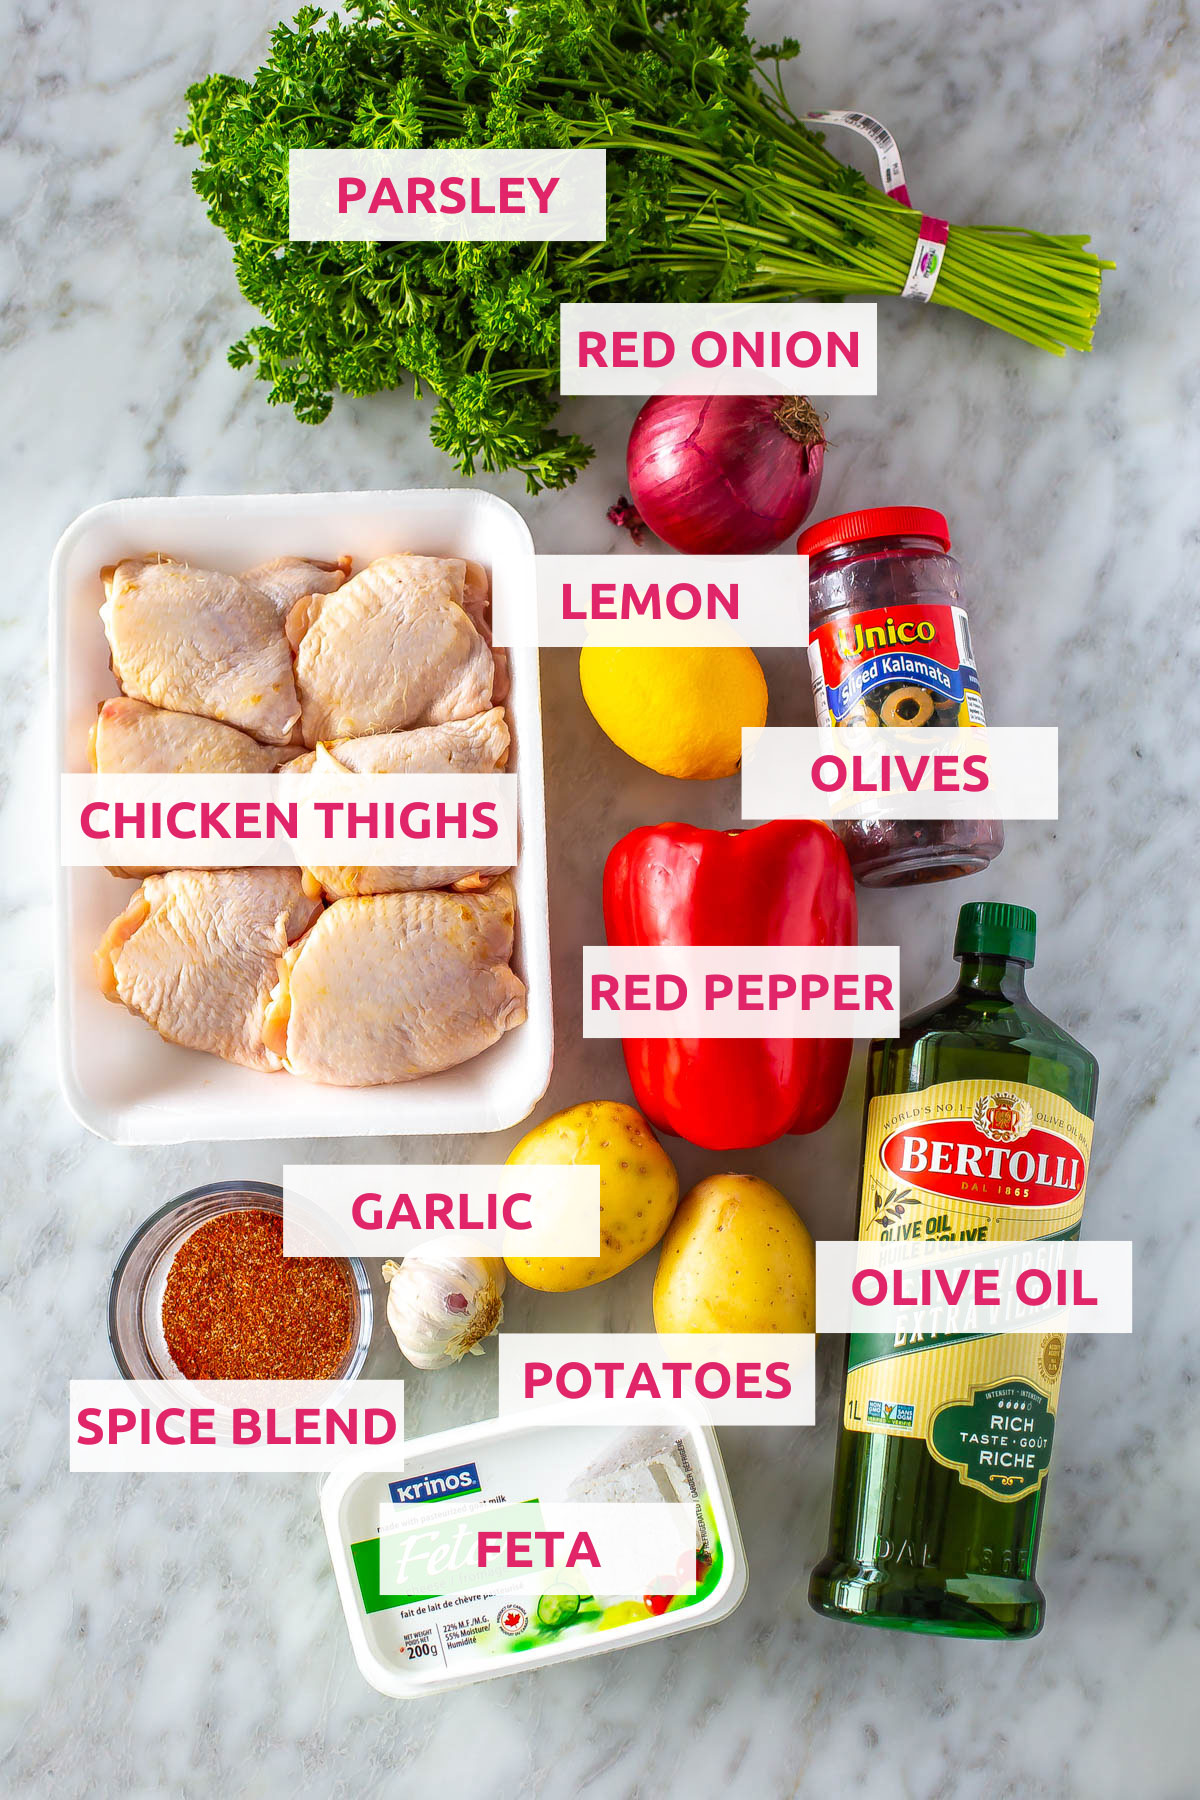 Ingredients for baked chicken thighs: chicken thighs, spice blend, olive oil, lemon, garlic, feta, red pepper, olives, red onion and parsley.